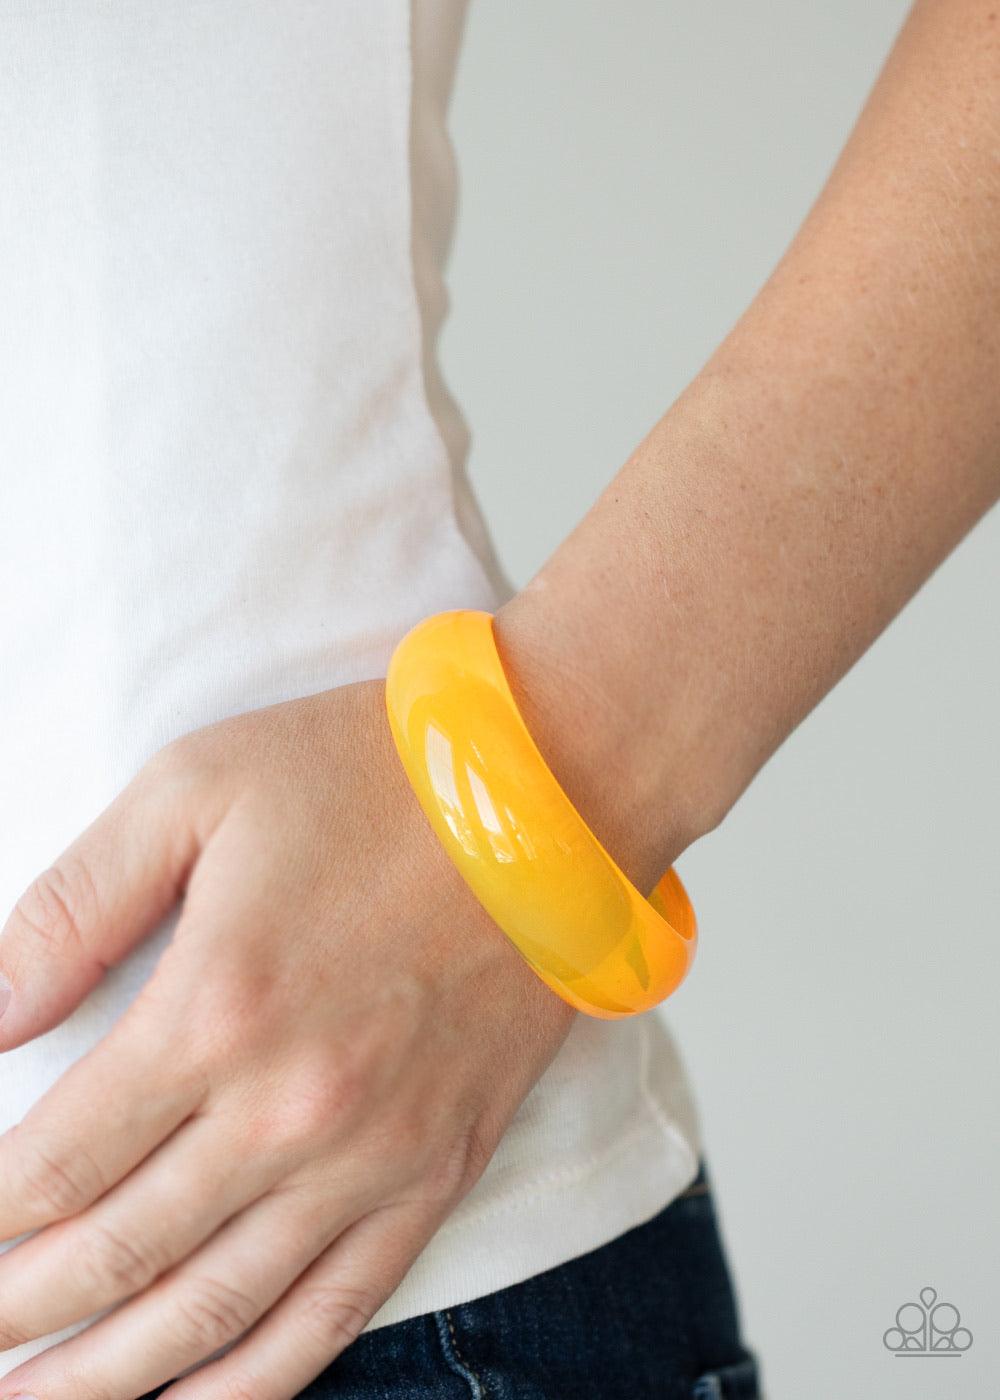 Paparazzi Accessories Major Material Girl - Orange A neon orange acrylic bangle slides along the wrist for a colorfully retro flair. The shiny bangle gradually widens at the top for a fabulous finish. Sold as one individual bracelet. Jewelry